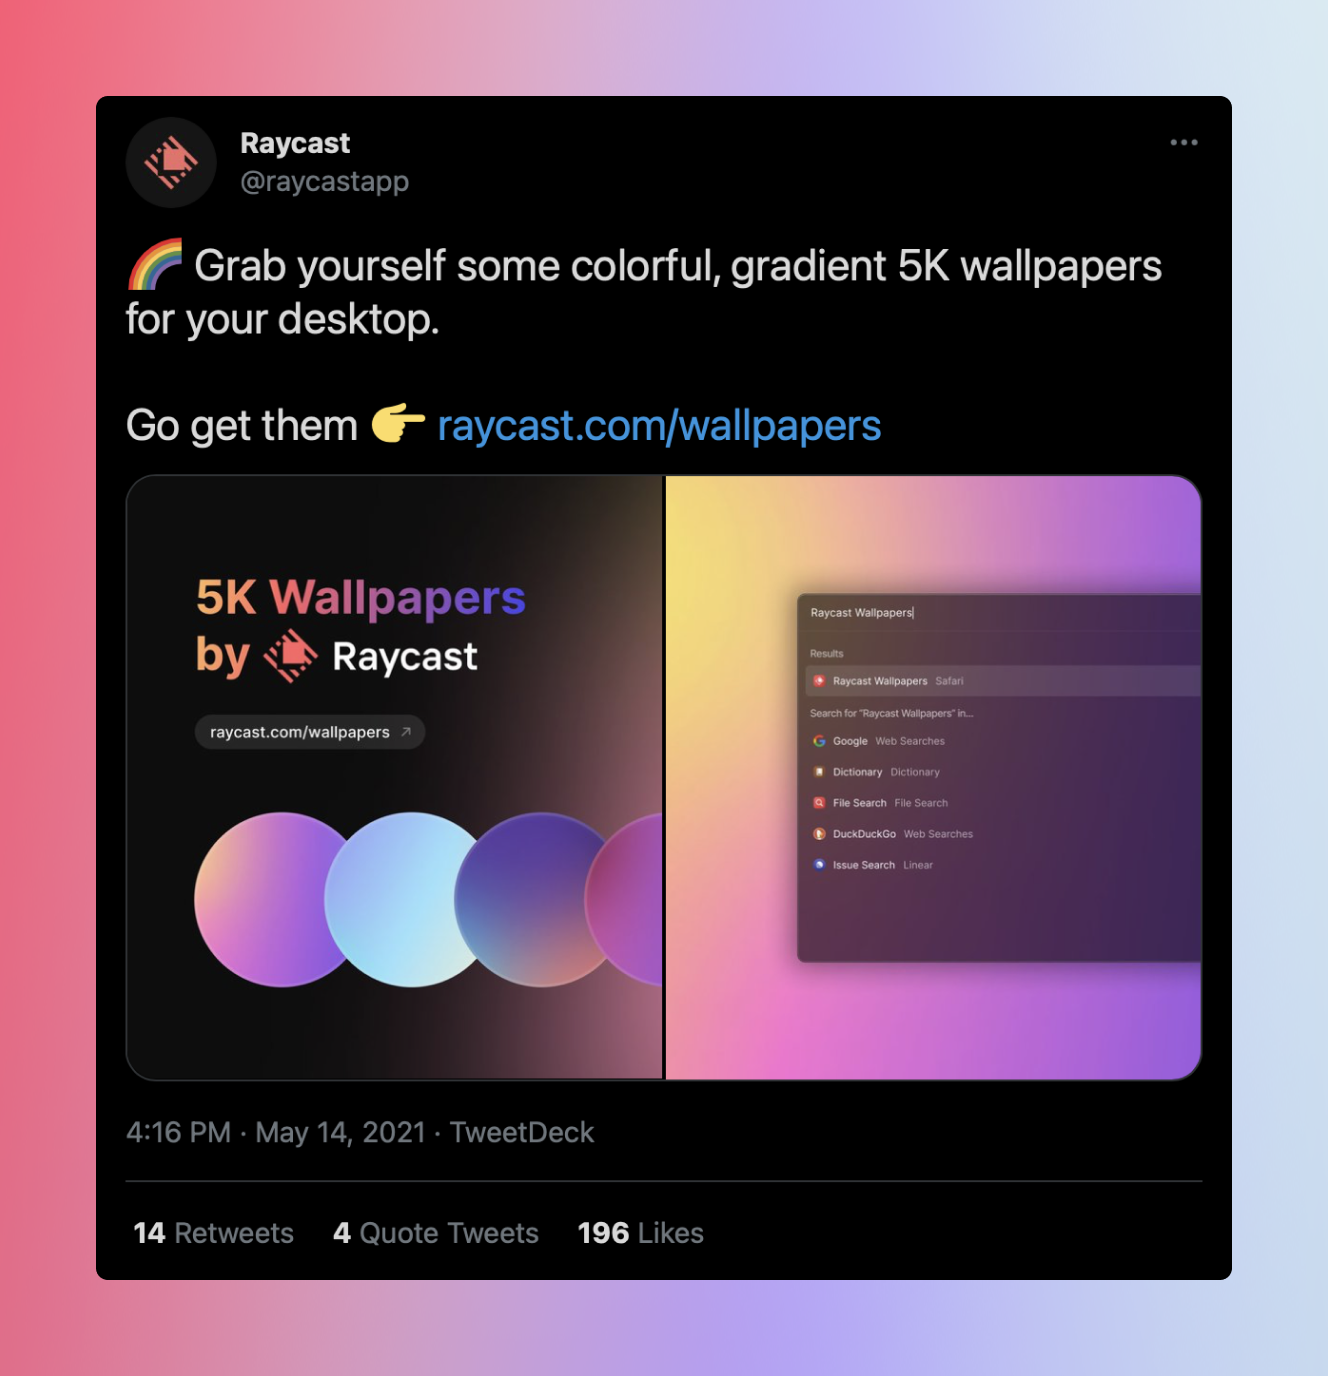 Our tweet when we launched Raycast Wallpapers